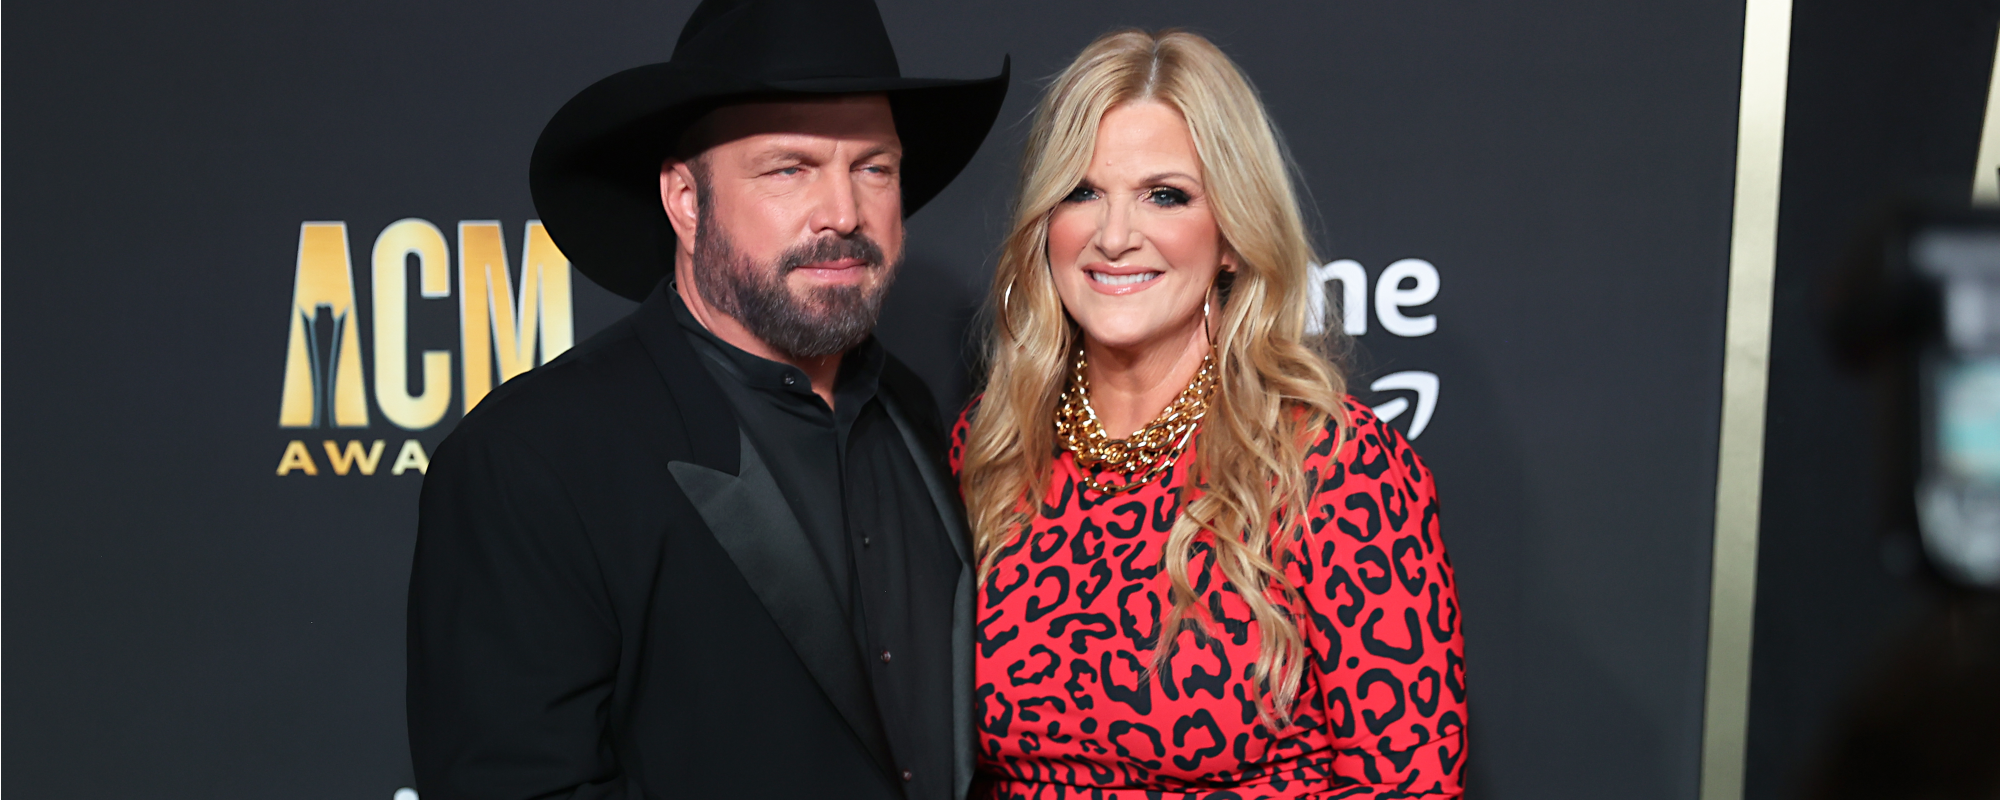 Look: Trisha Yearwood and Garth Brooks Hilariously Gave Each Other the Same Anniversary Gift